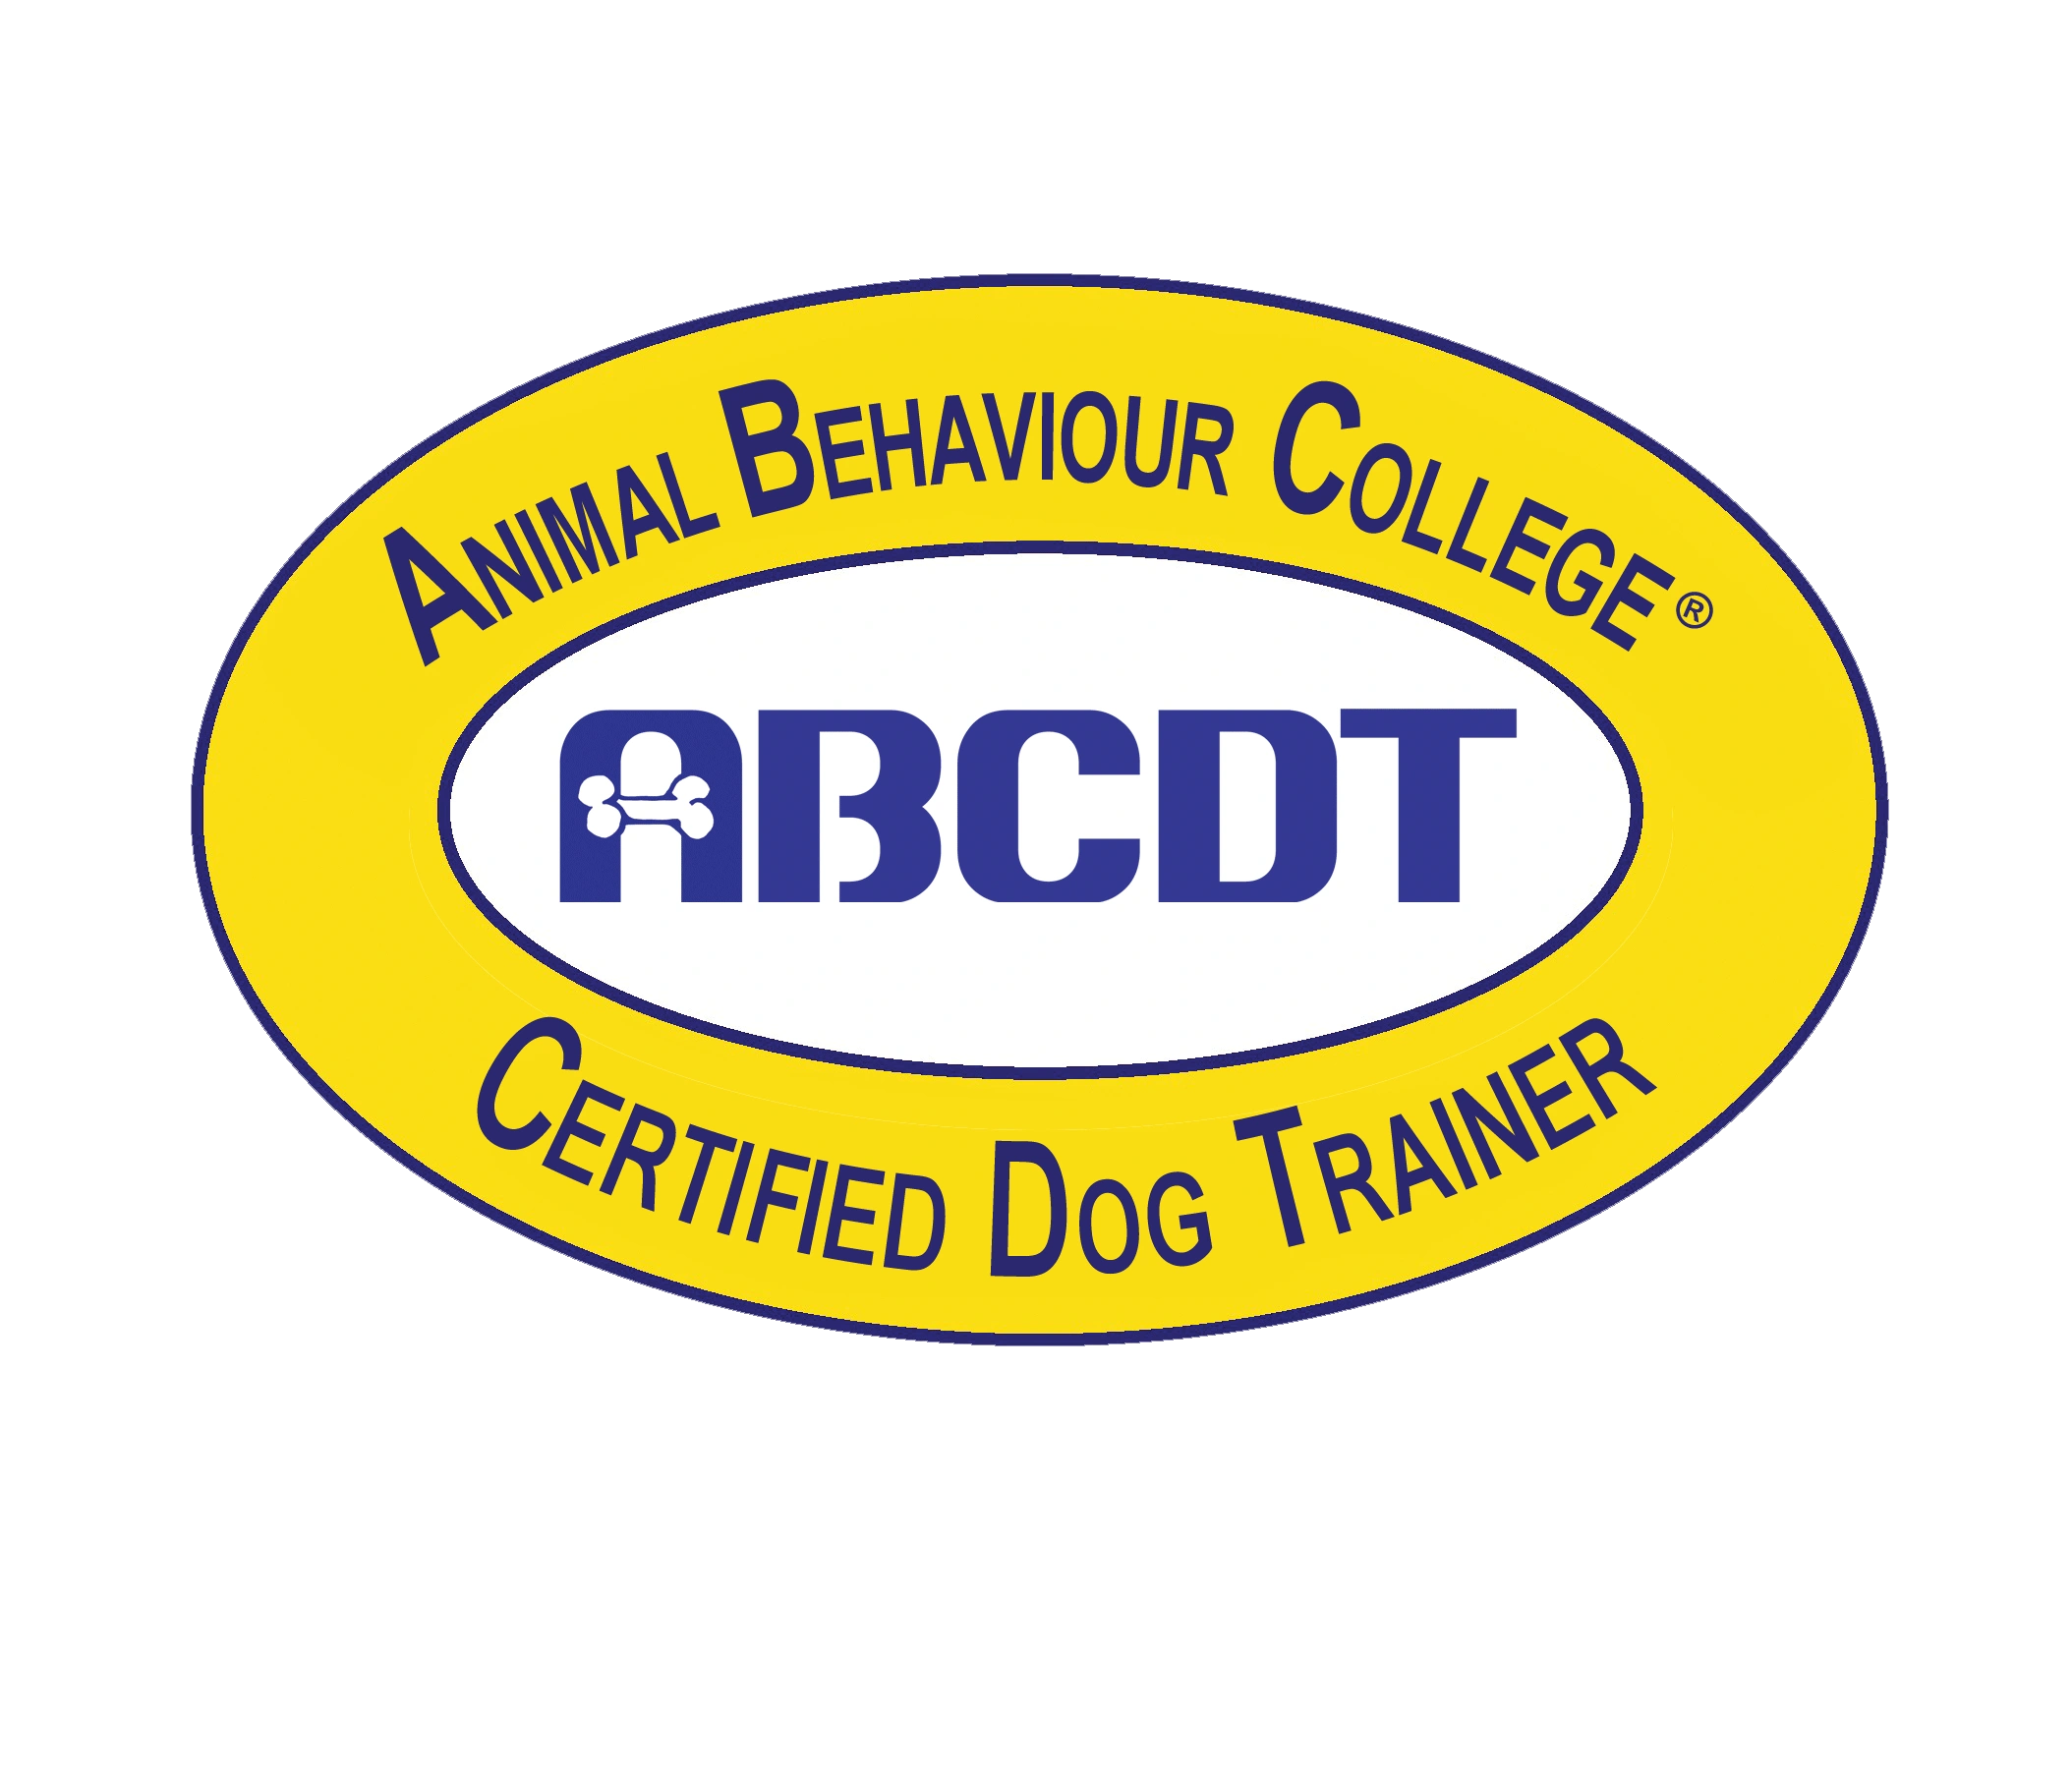 ABC Certified Dog Trainer Since May 3, 2019